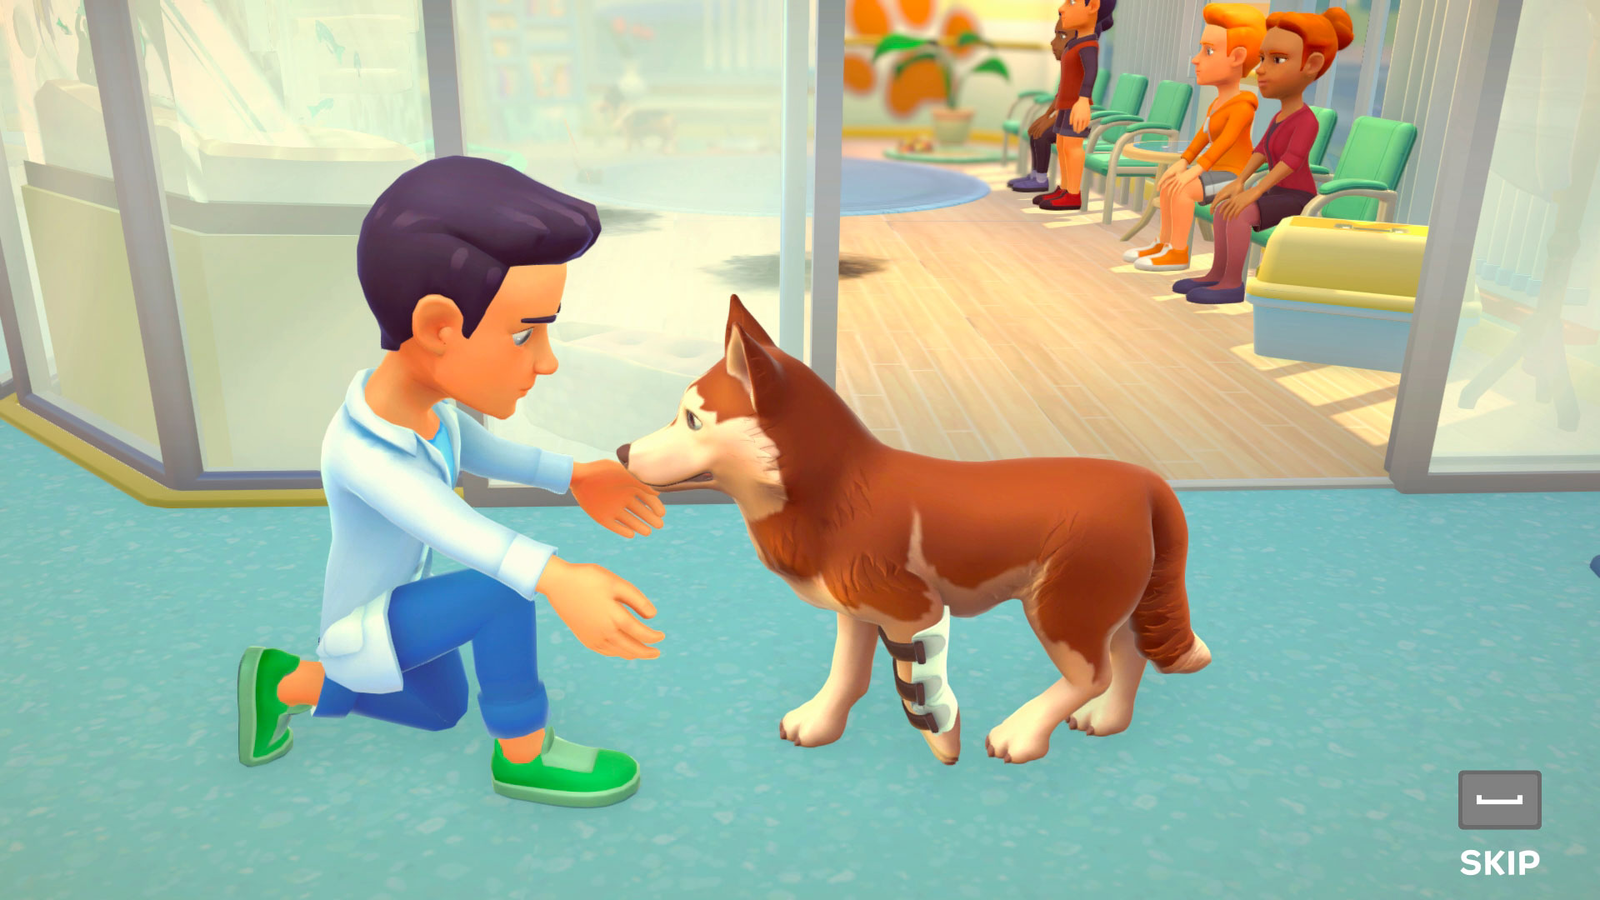 My Universe - Pet Clinic Cats & Dogs